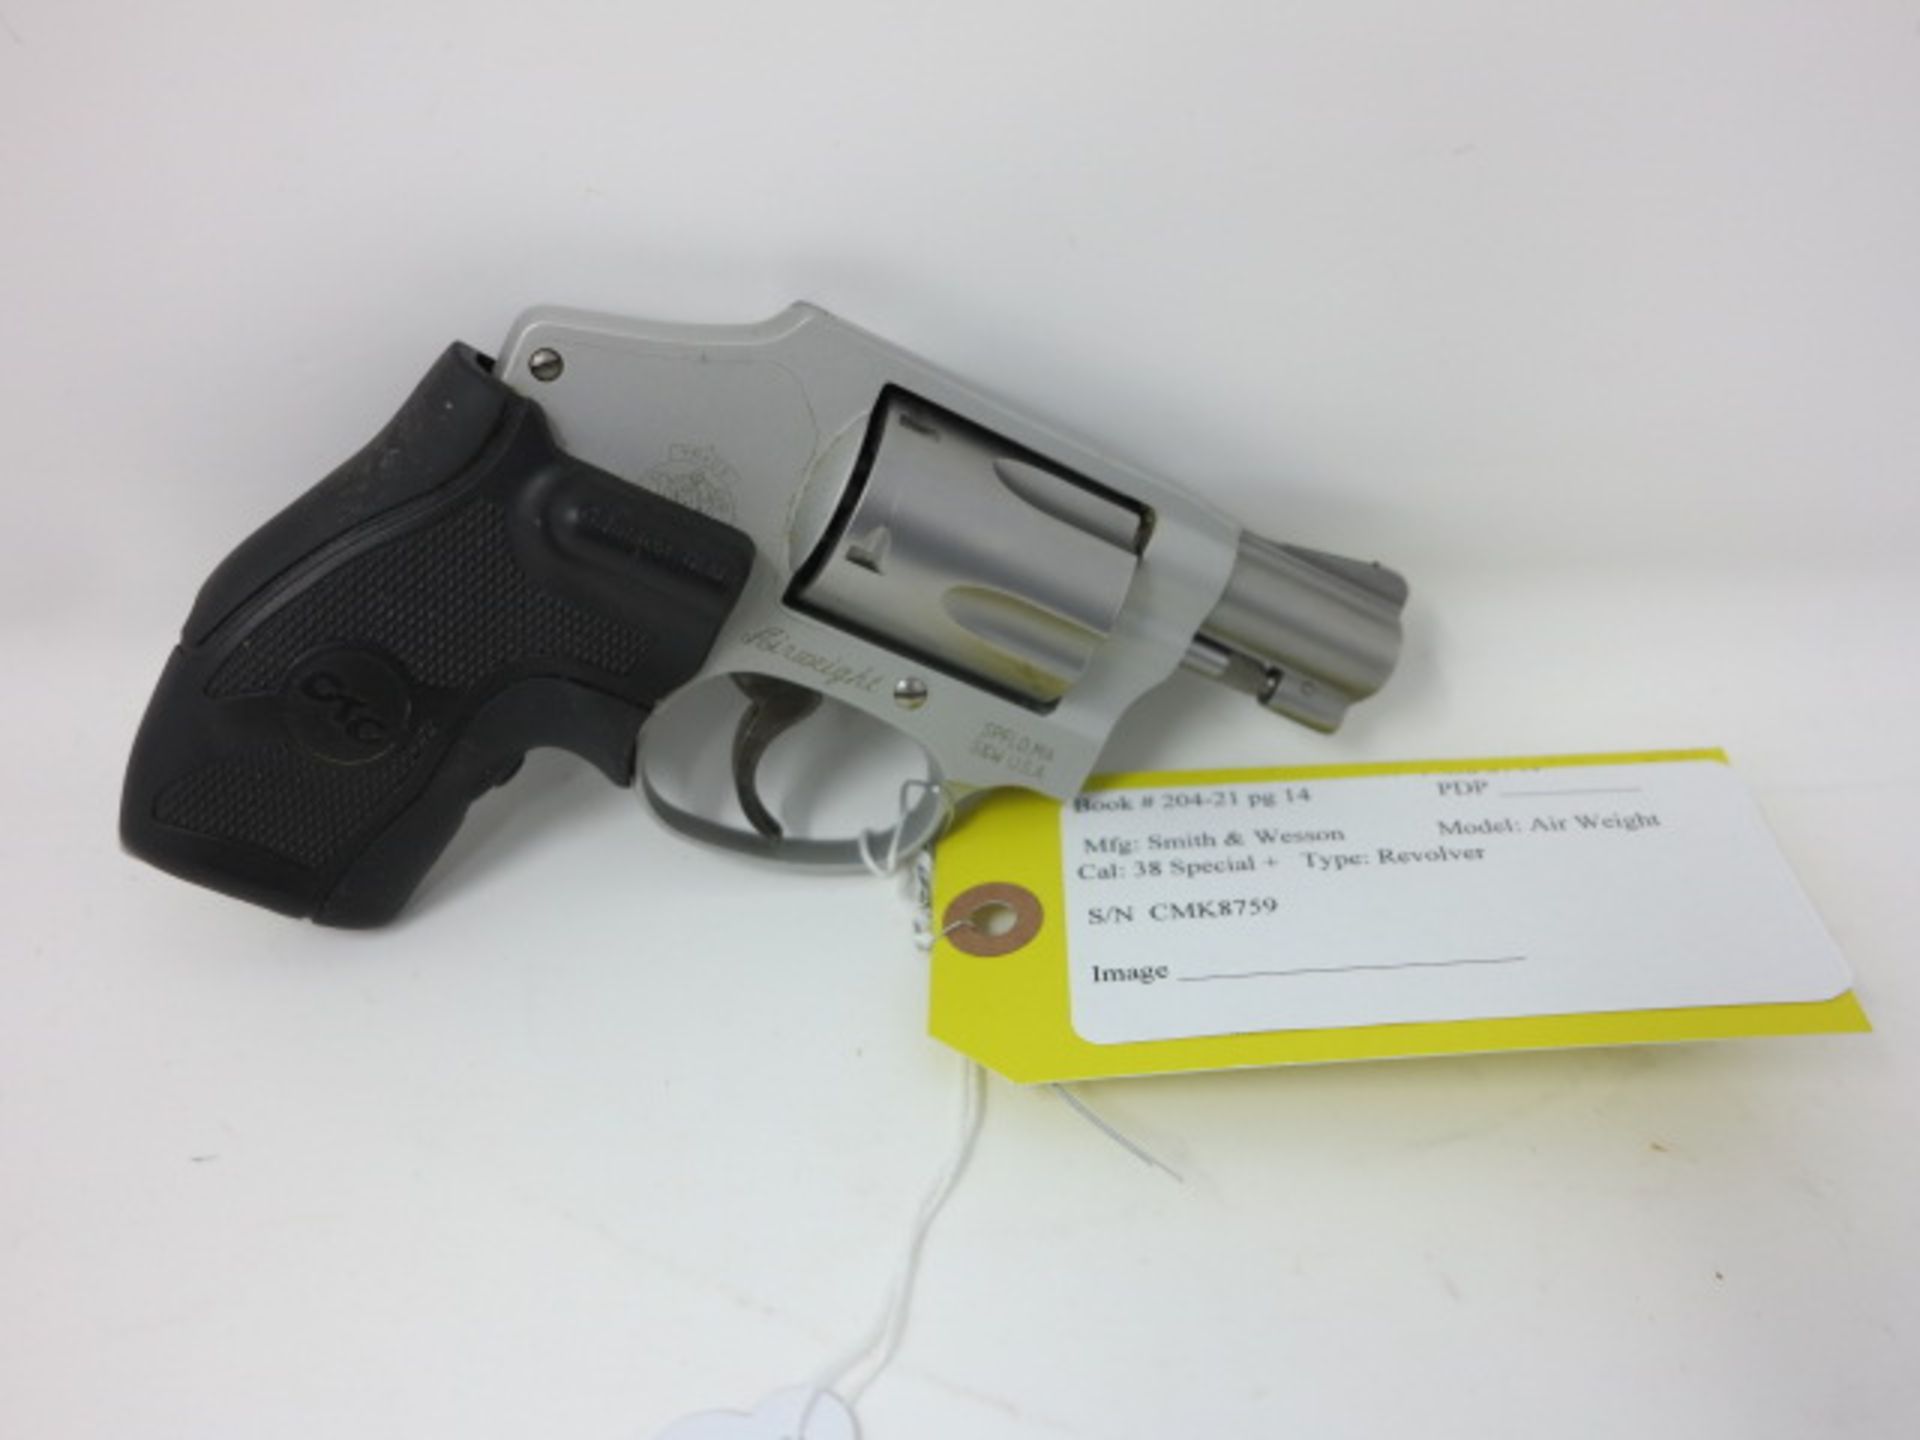 Smith & Wesson .38 SPL+, Model Air Weight, S/N CMK8759